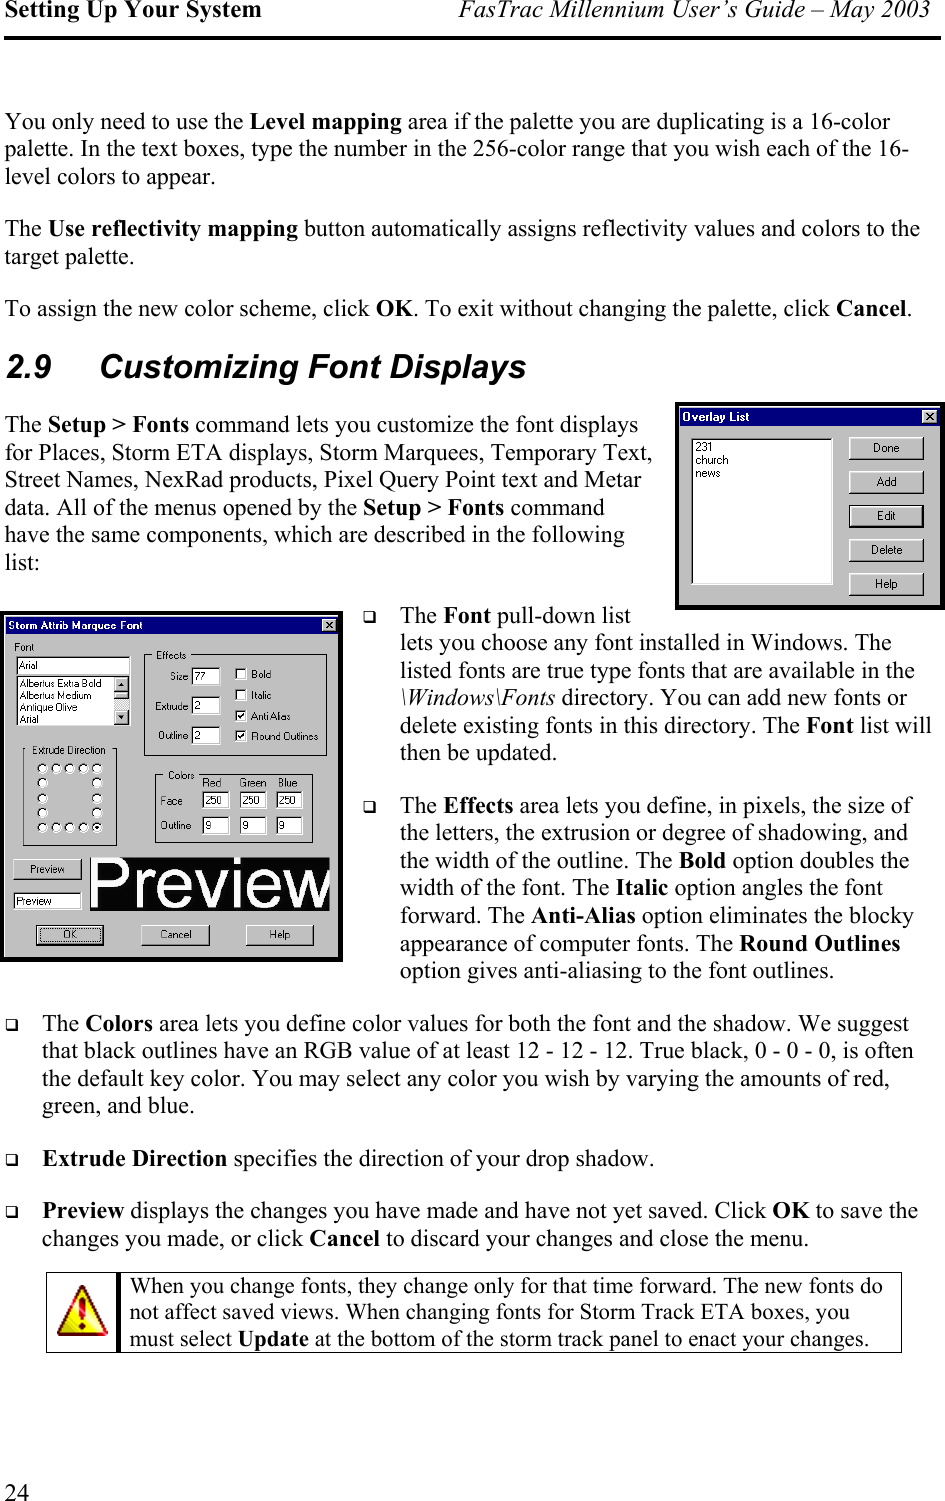 Setting Up Your System  FasTrac Millennium User’s Guide – May 2003 You only need to use the Level mapping area if the palette you are duplicating is a 16-color palette. In the text boxes, type the number in the 256-color range that you wish each of the 16-level colors to appear. The Use reflectivity mapping button automatically assigns reflectivity values and colors to the target palette. To assign the new color scheme, click OK. To exit without changing the palette, click Cancel. 2.9  Customizing Font Displays The Setup &gt; Fonts command lets you customize the font displays for Places, Storm ETA displays, Storm Marquees, Temporary Text, Street Names, NexRad products, Pixel Query Point text and Metar data. All of the menus opened by the Setup &gt; Fonts command have the same components, which are described in the following list:  s or t list will then be updated.  e Round Outlines option gives anti-aliasing to the font outlines.  n lor. You may select any color you wish by varying the amounts of red, green, and blue.   Extrude Direction specifies the direction of your drop shadow.   o save the changes you made, or click Cancel to discard your changes and close the menu.  The Font pull-down list lets you choose any font installed in Windows. The listed fonts are true type fonts that are available in the \Windows\Fonts directory. You can add new fontdelete existing fonts in this directory. The FonThe Effects area lets you define, in pixels, the size of the letters, the extrusion or degree of shadowing, and the width of the outline. The Bold option doubles the width of the font. The Italic option angles the font forward. The Anti-Alias option eliminates the blocky appearance of computer fonts. ThThe Colors area lets you define color values for both the font and the shadow. We suggest that black outlines have an RGB value of at least 12 - 12 - 12. True black, 0 - 0 - 0, is oftethe default key coPreview displays the changes you have made and have not yet saved. Click OK t When you change fonts, they change only for that time forward. The new fonts not affect saved views. When changing fonts for Storm Track ETA boxes, you do must select Update at the bottom of the storm track panel to enact your changes.  24 